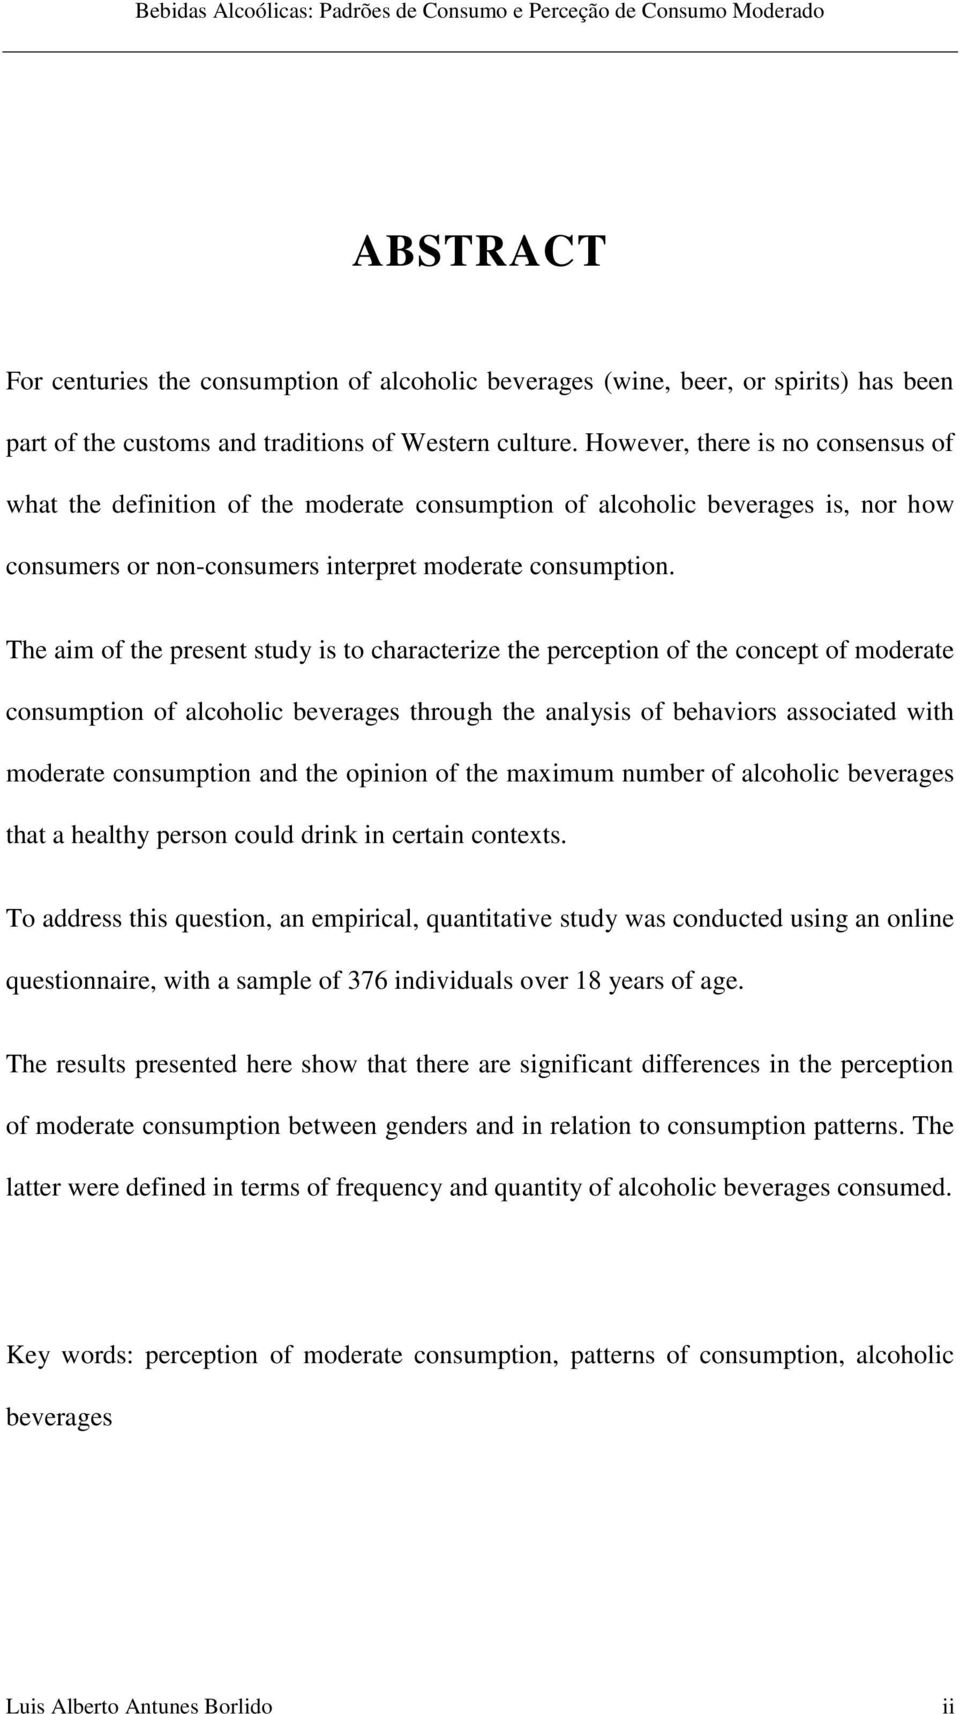 The aim of the present study is to characterize the perception of the concept of moderate consumption of alcoholic beverages through the analysis of behaviors associated with moderate consumption and